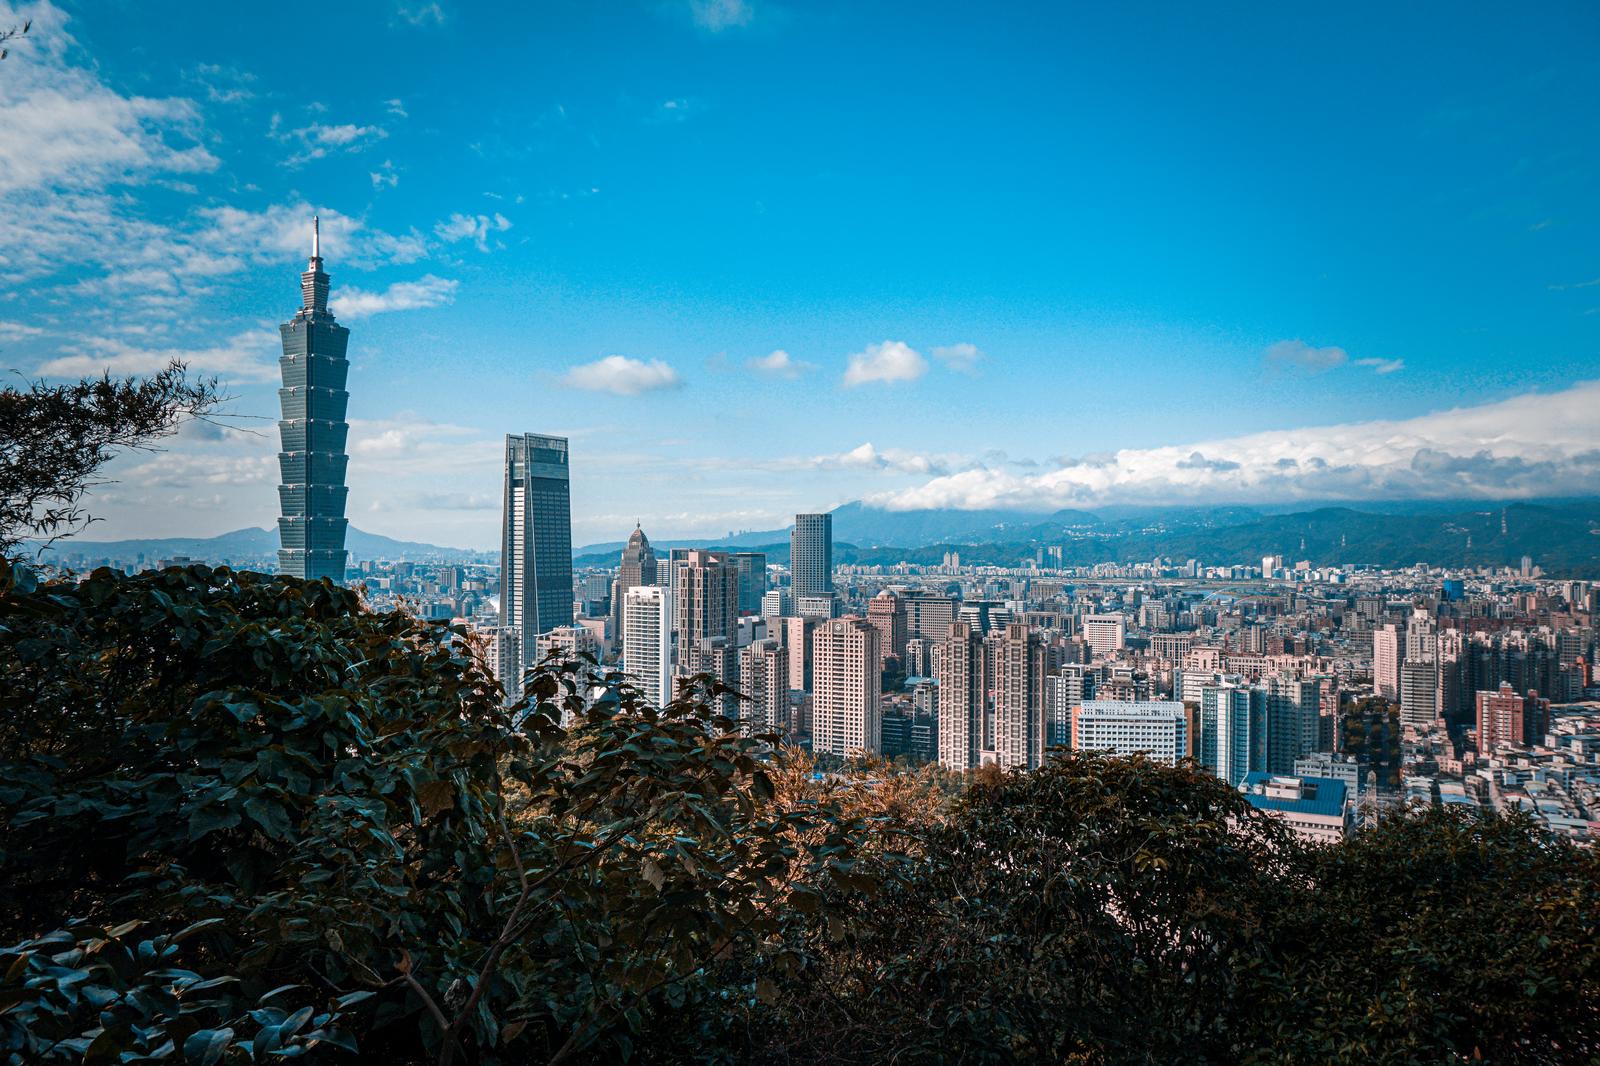 Name That City! Put Your Travel Knowledge to Test With This Picture Quiz! Taipei, Taiwan